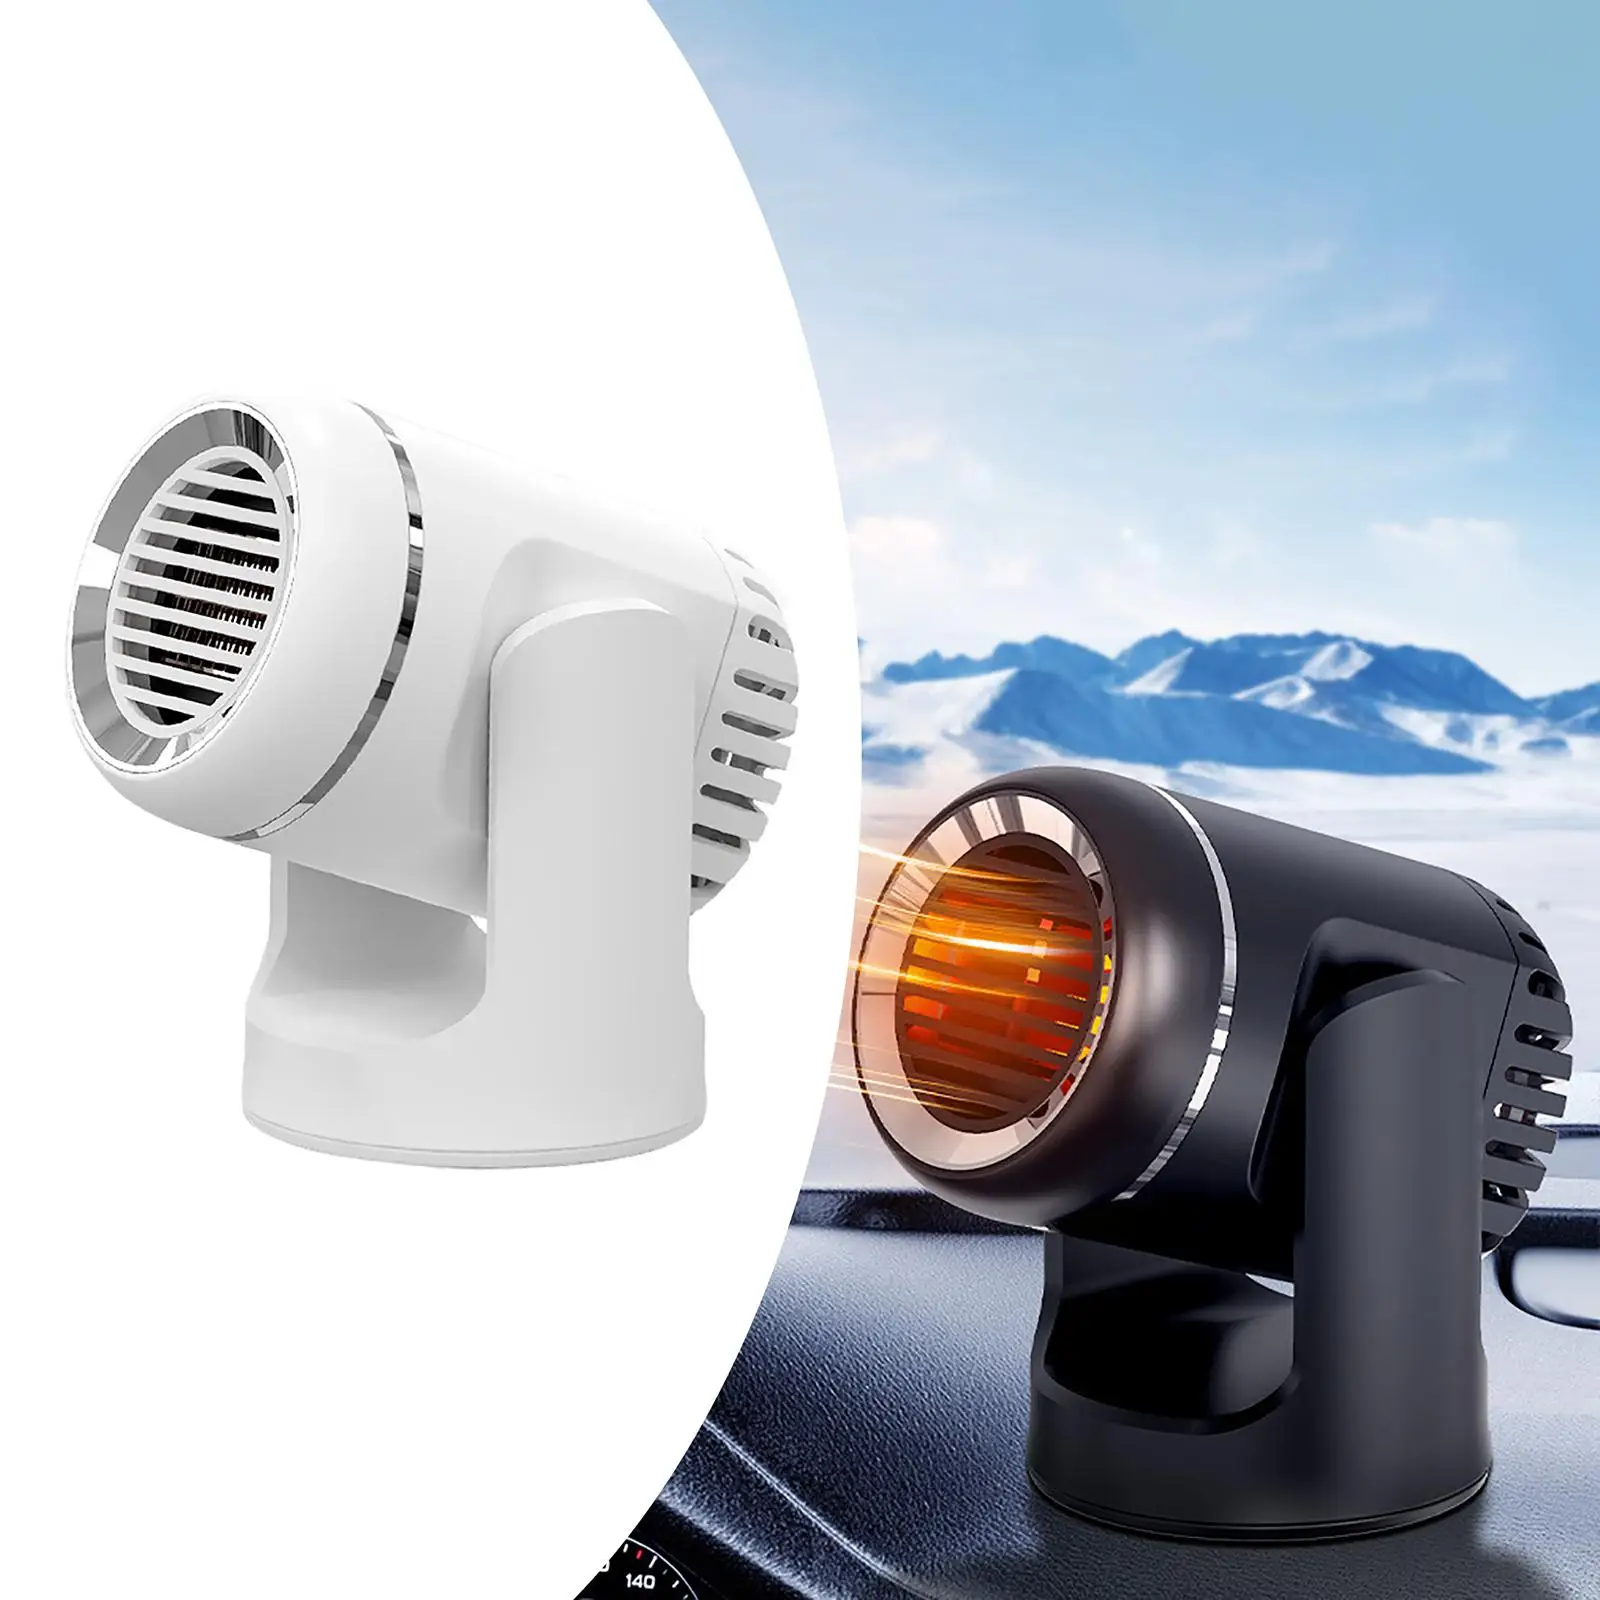 Car Heater 2 in 1 Car Warm Air Heater Auto Heater Fit for Winter Vehicle